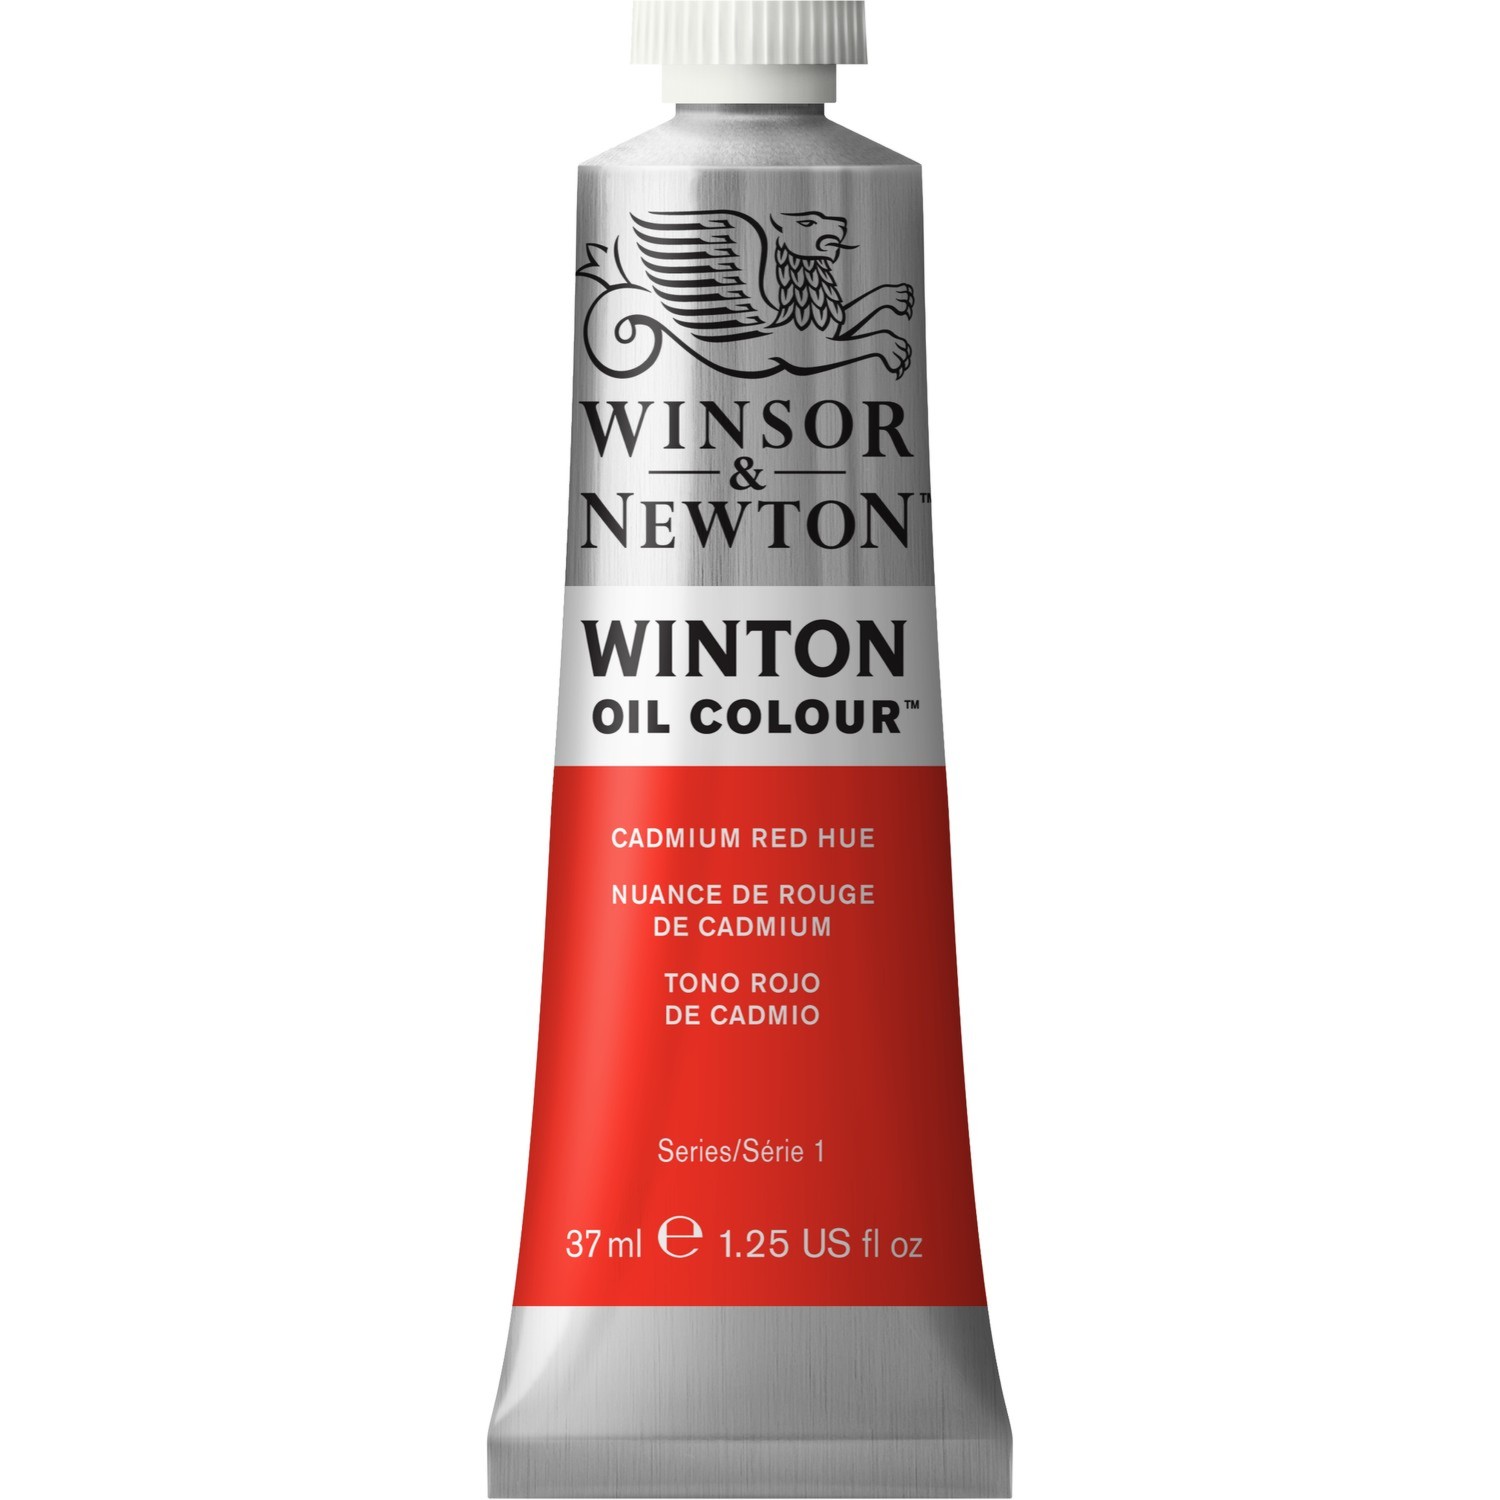 Winsor and Newton 37ml Winton Oil Colours - Cadmium Red Hue Image 1